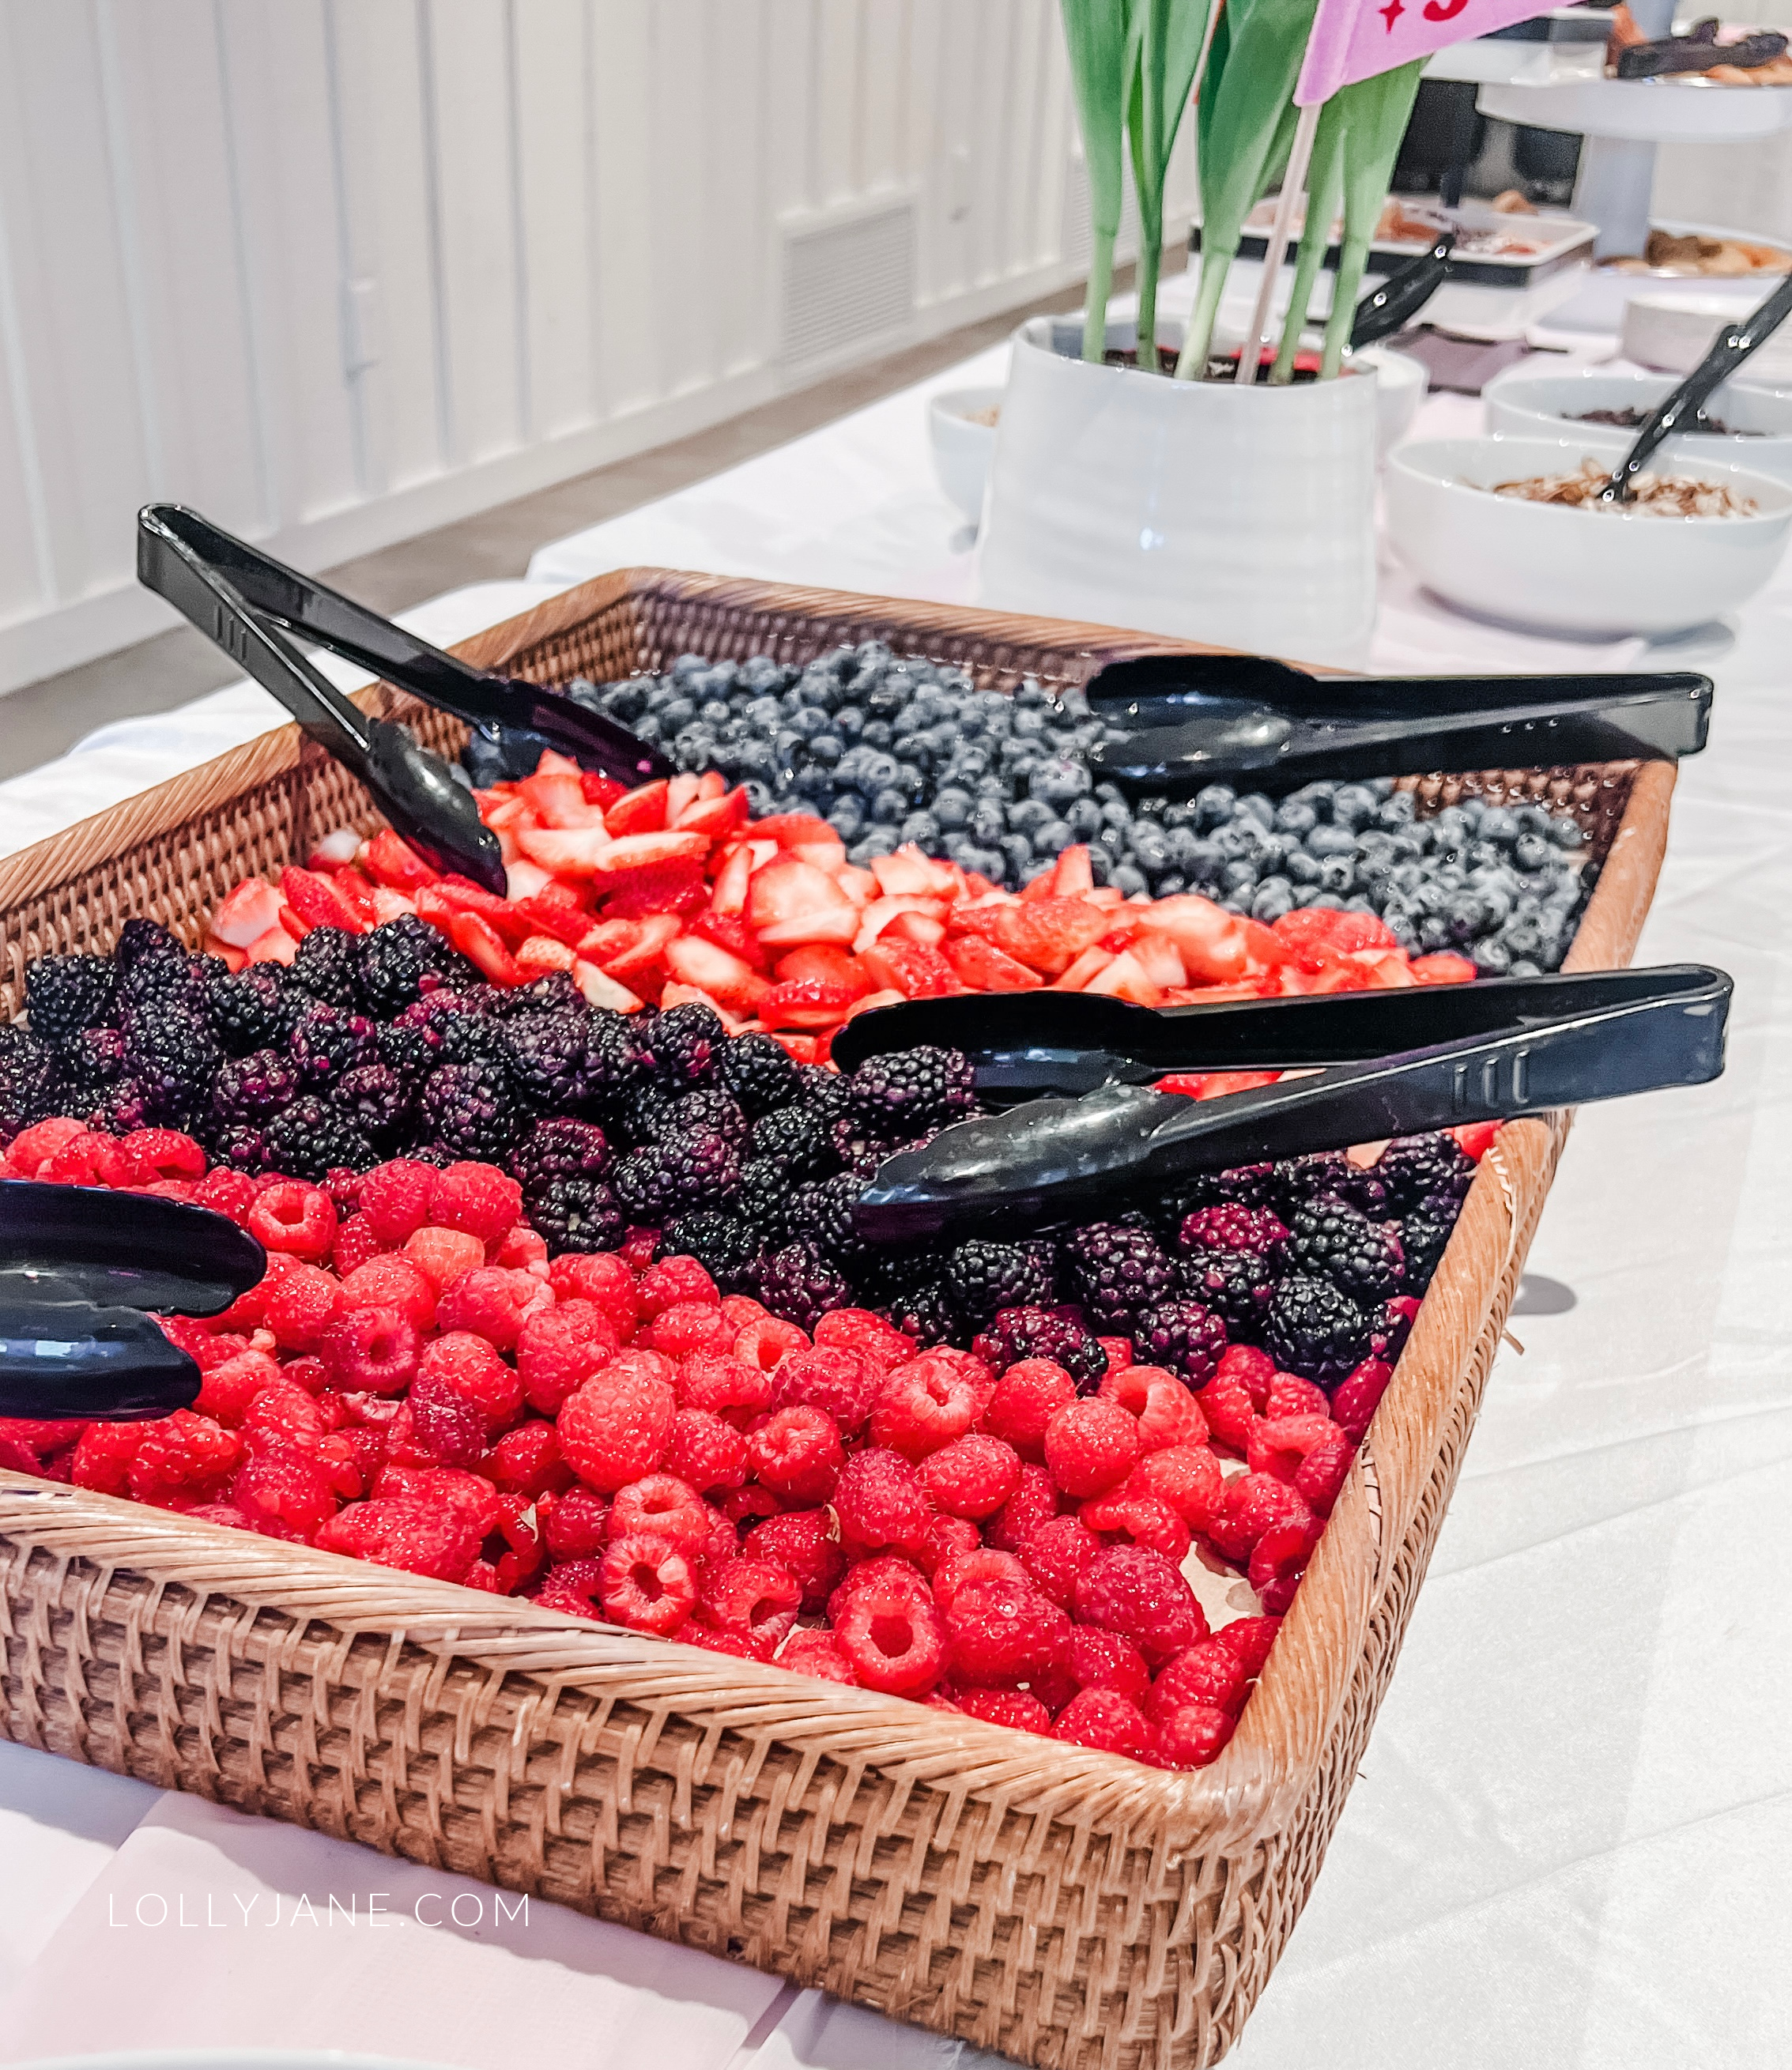 Hosting a Bridal Shower Brunch? Elevate the experience with a vibrant Yogurt Bar! 🍓🥥 Create a customizable spread with fresh fruits, crunchy granola, and decadent toppings for a celebration that's as delightful as the bride-to-be! 💍✨ #BridalShower #BrunchIdeas #YogurtBar